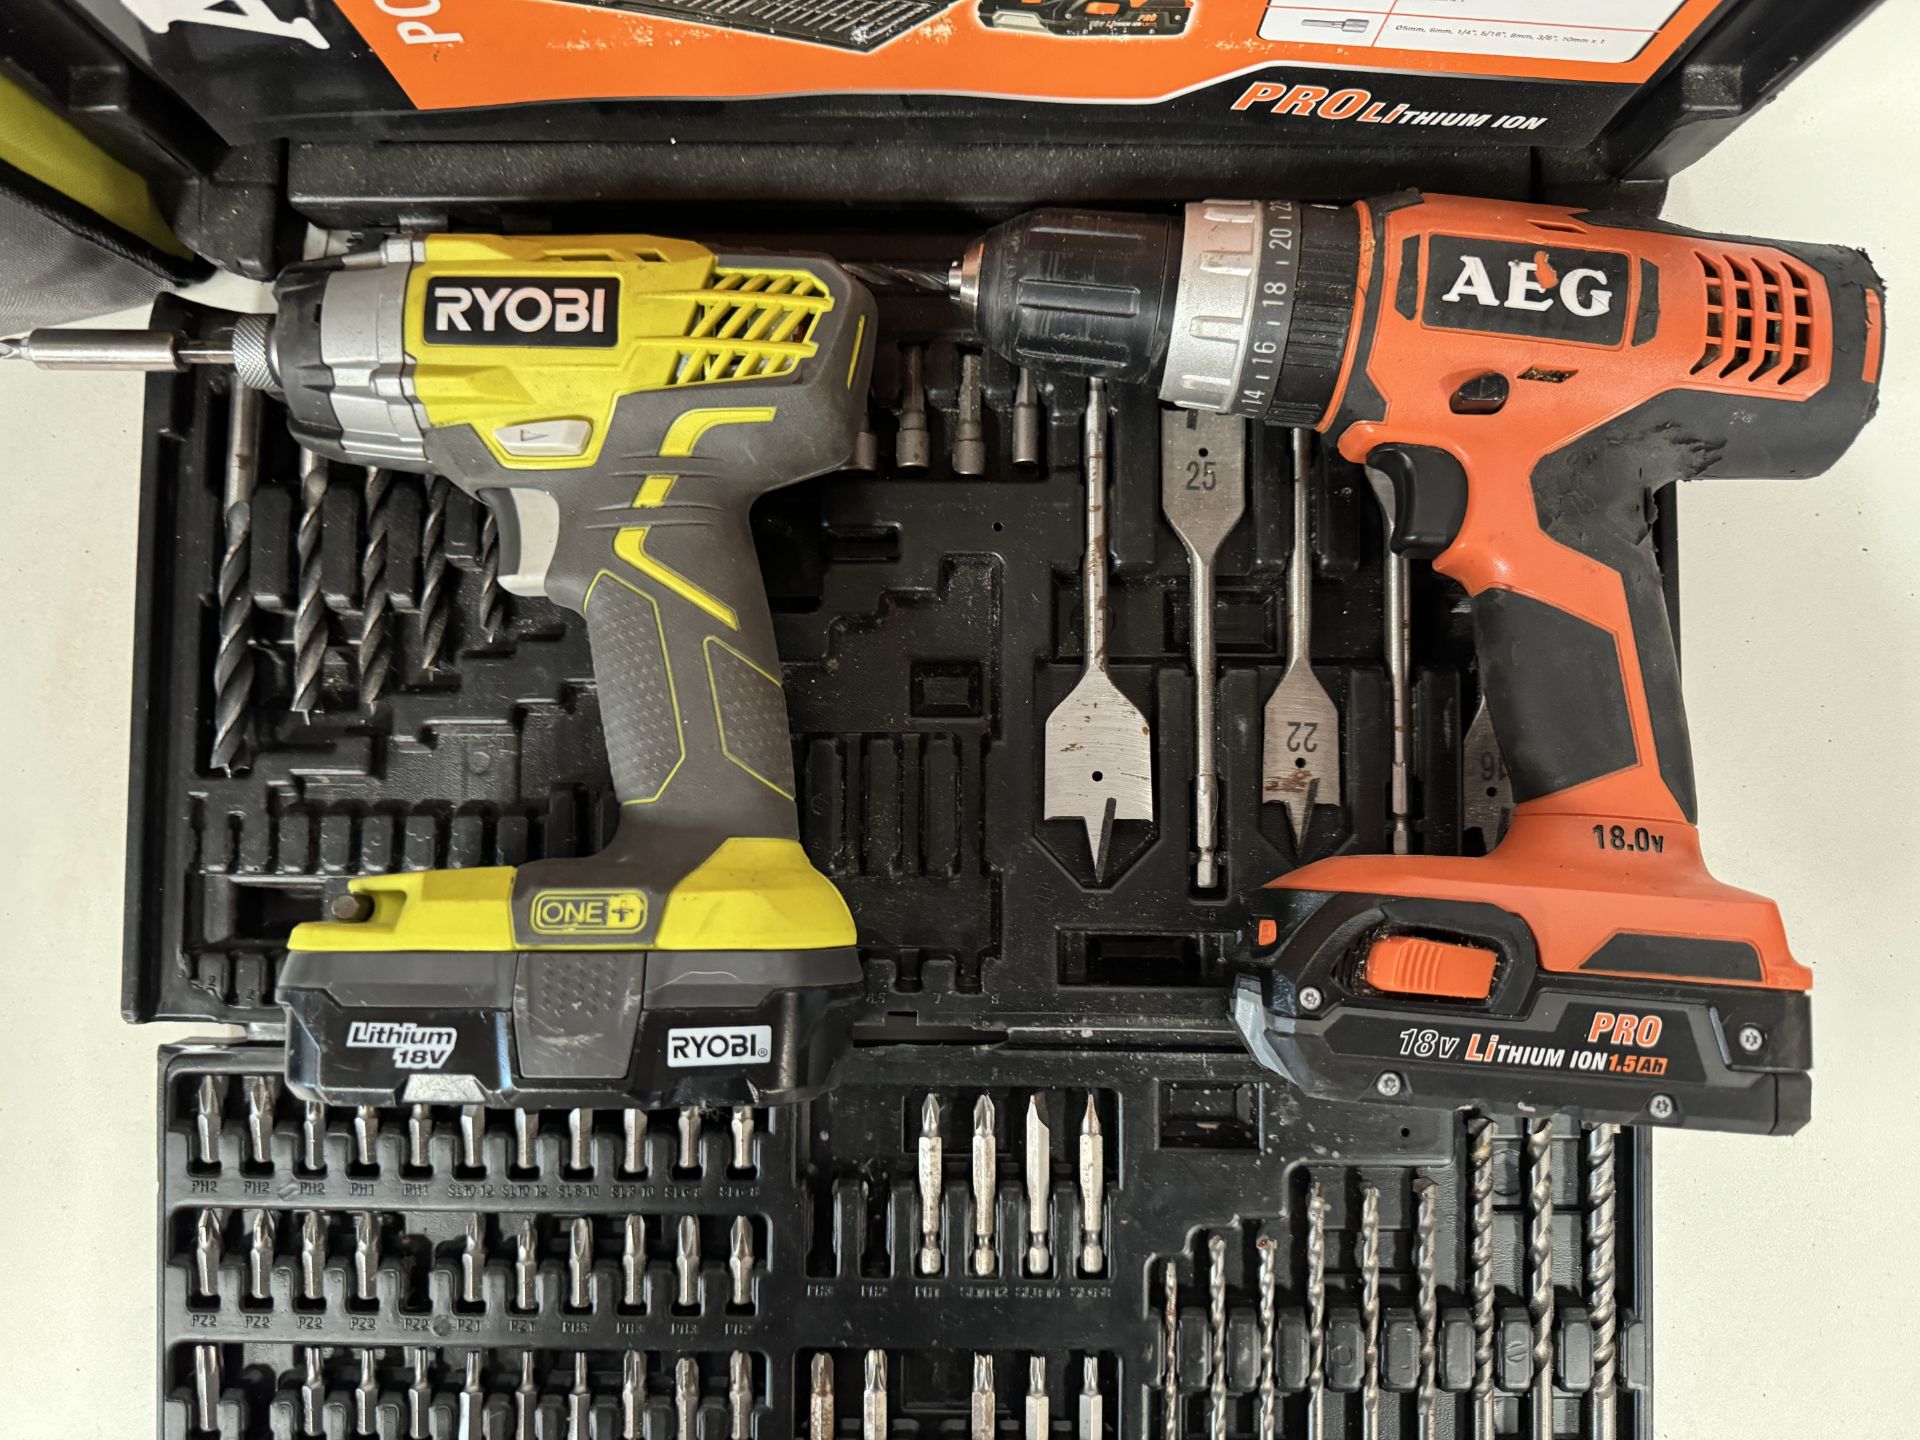 AEG BSB 18G Cordless Drill with Two Batteries &Charger and a Ryobi RID1801 Impact Driver with - Image 2 of 6